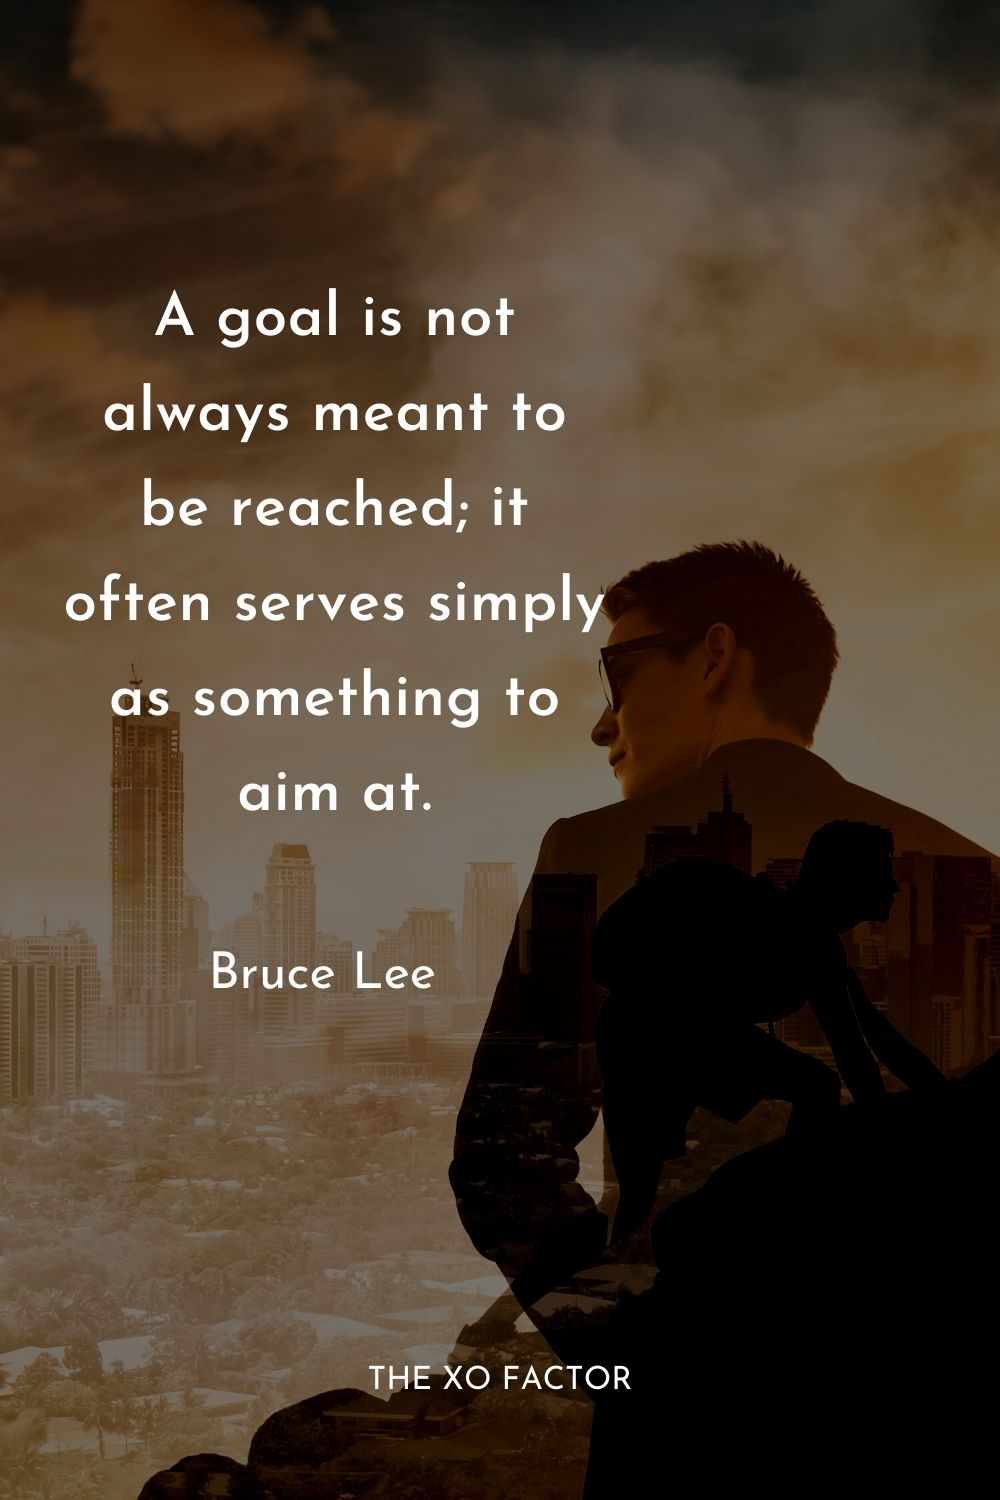 A goal is not always meant to be reached; it often serves simply as something to aim at. Bruce Lee